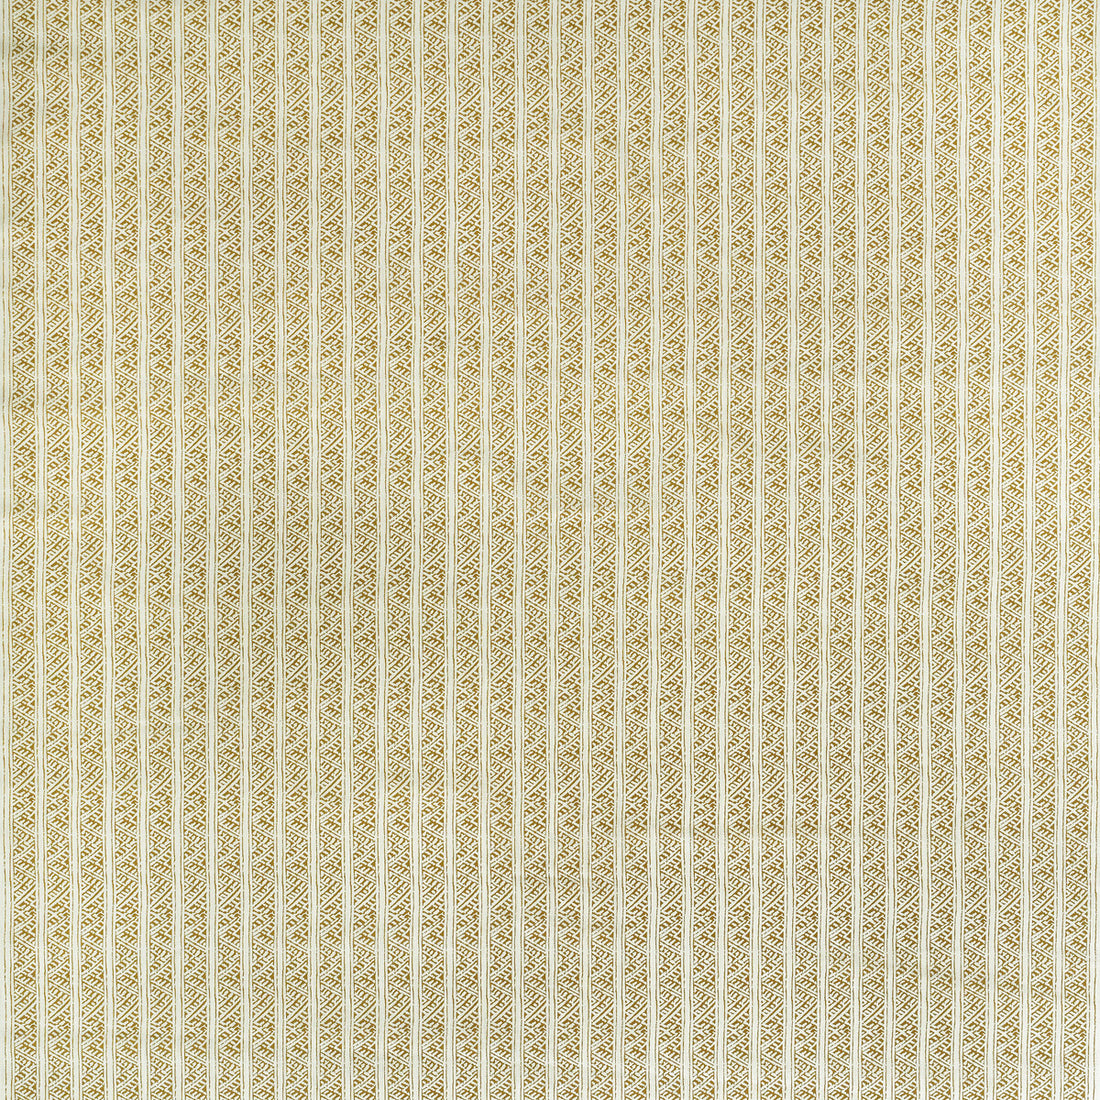 Ostuni Stripe Outdoor fabric in ochre color - pattern AM100388.4.0 - by Kravet Couture in the Andrew Martin Sophie Patterson Outdoor collection